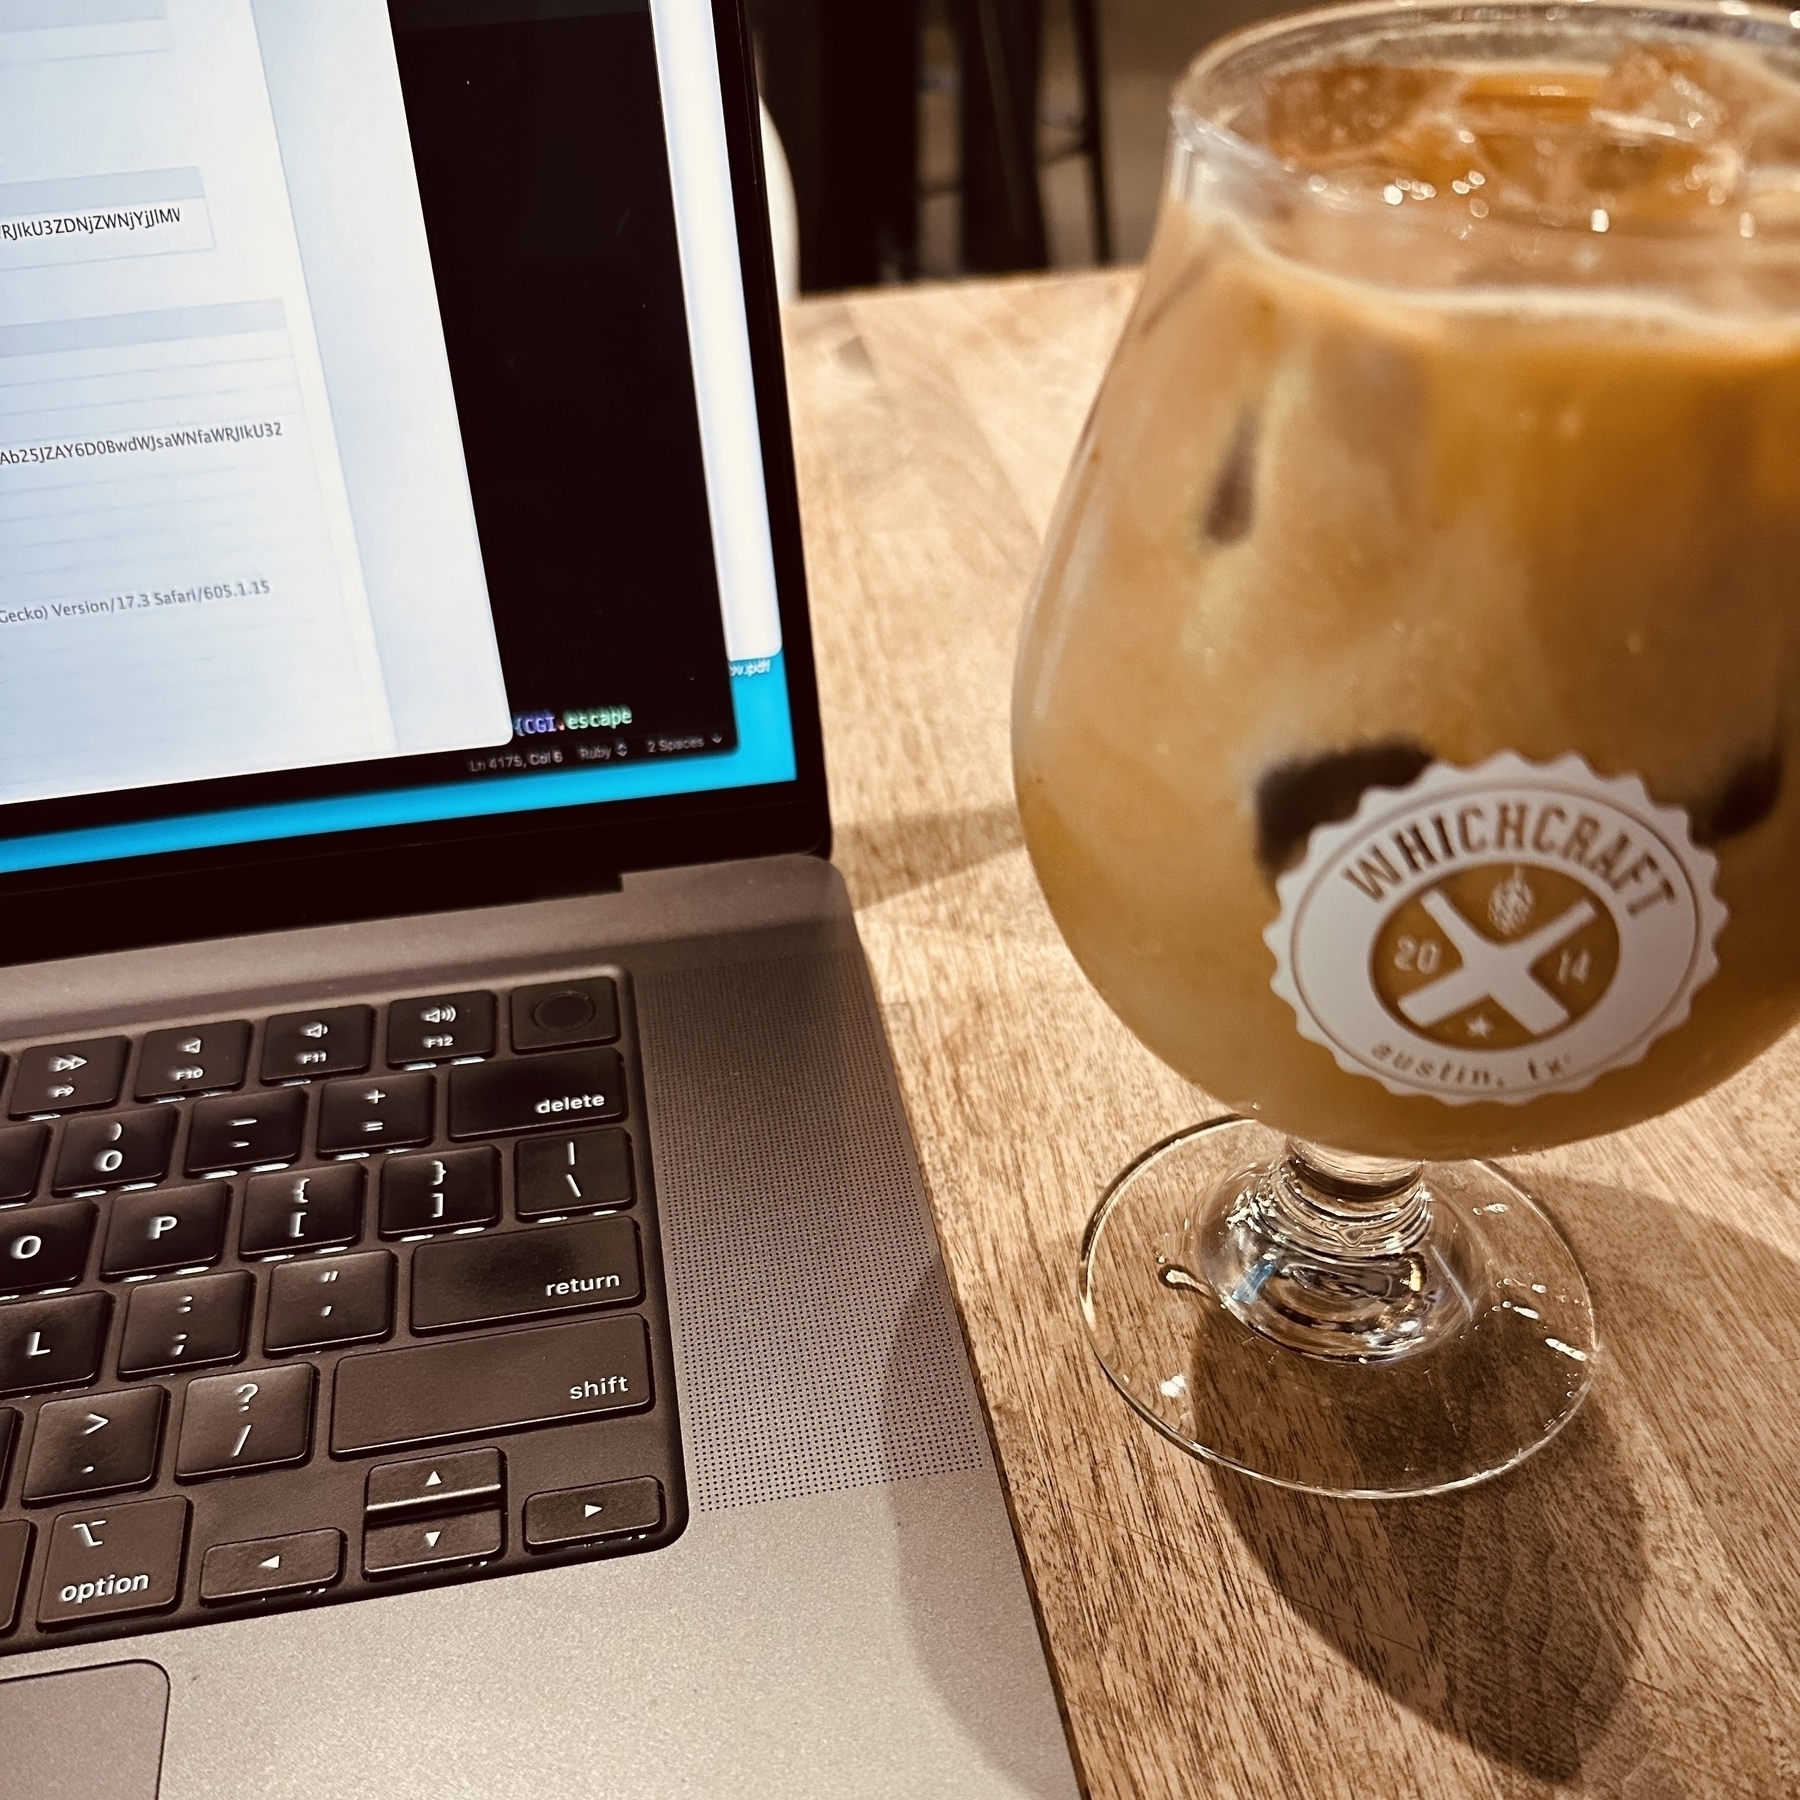 A glass of iced coffee sits on a table next to a laptop with text on its screen, part of a server message in Safari. The glass says Whichcraft.